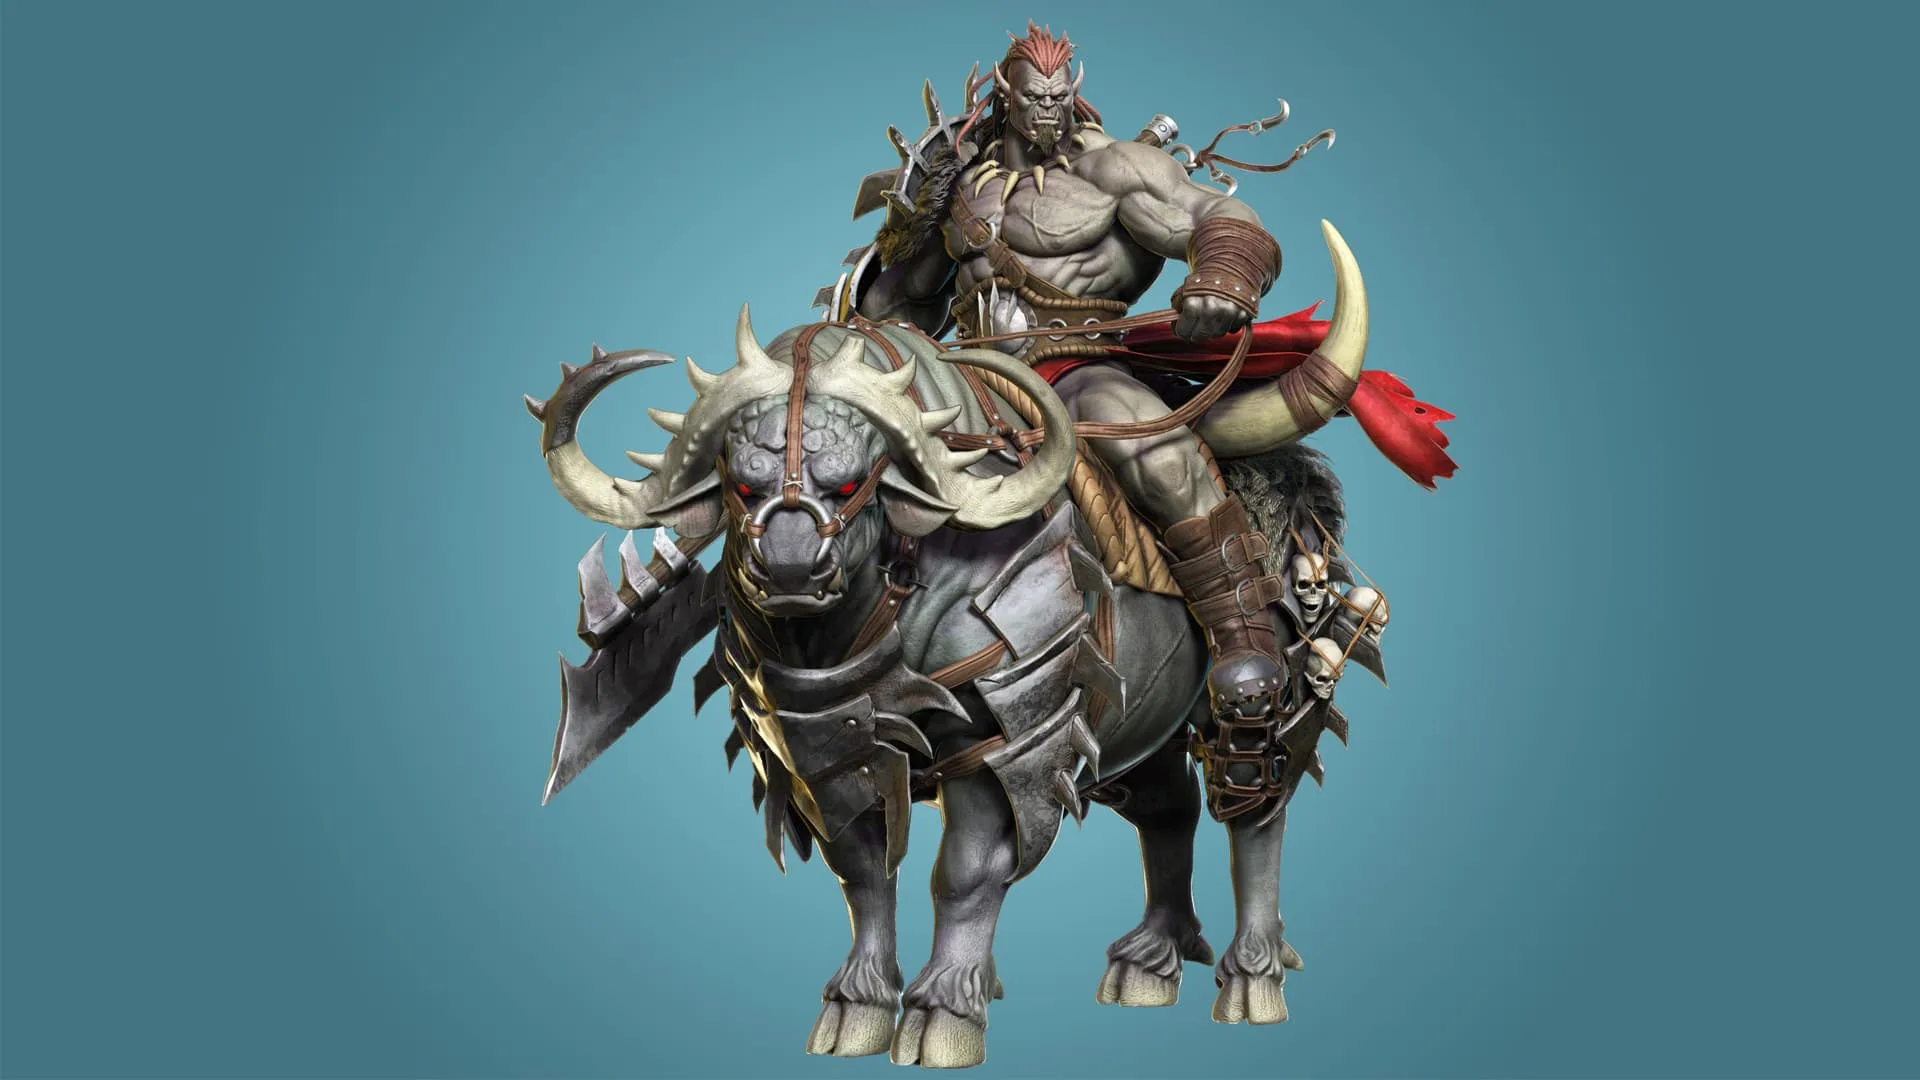 Orc Rider & Bull Creature Creation In Zbrush